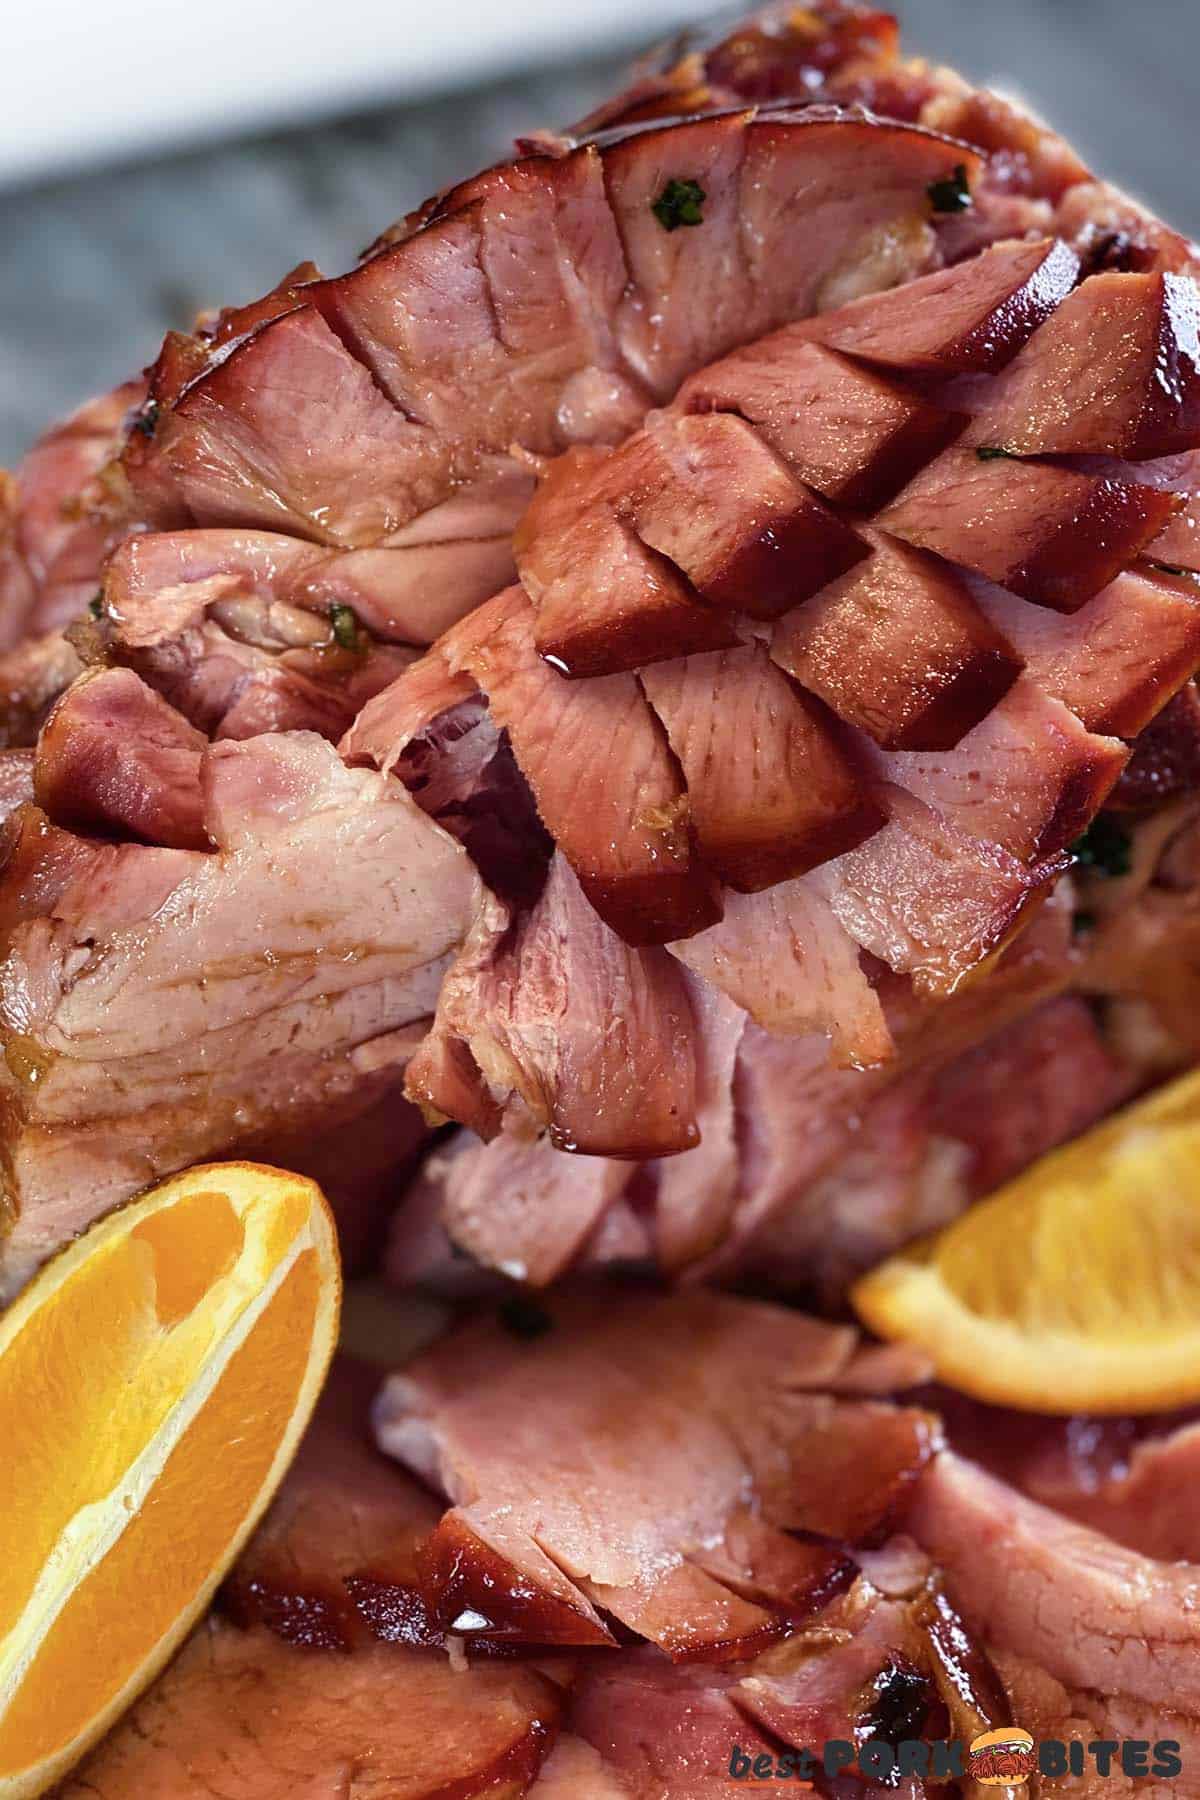 close-up image of sliced completed ham